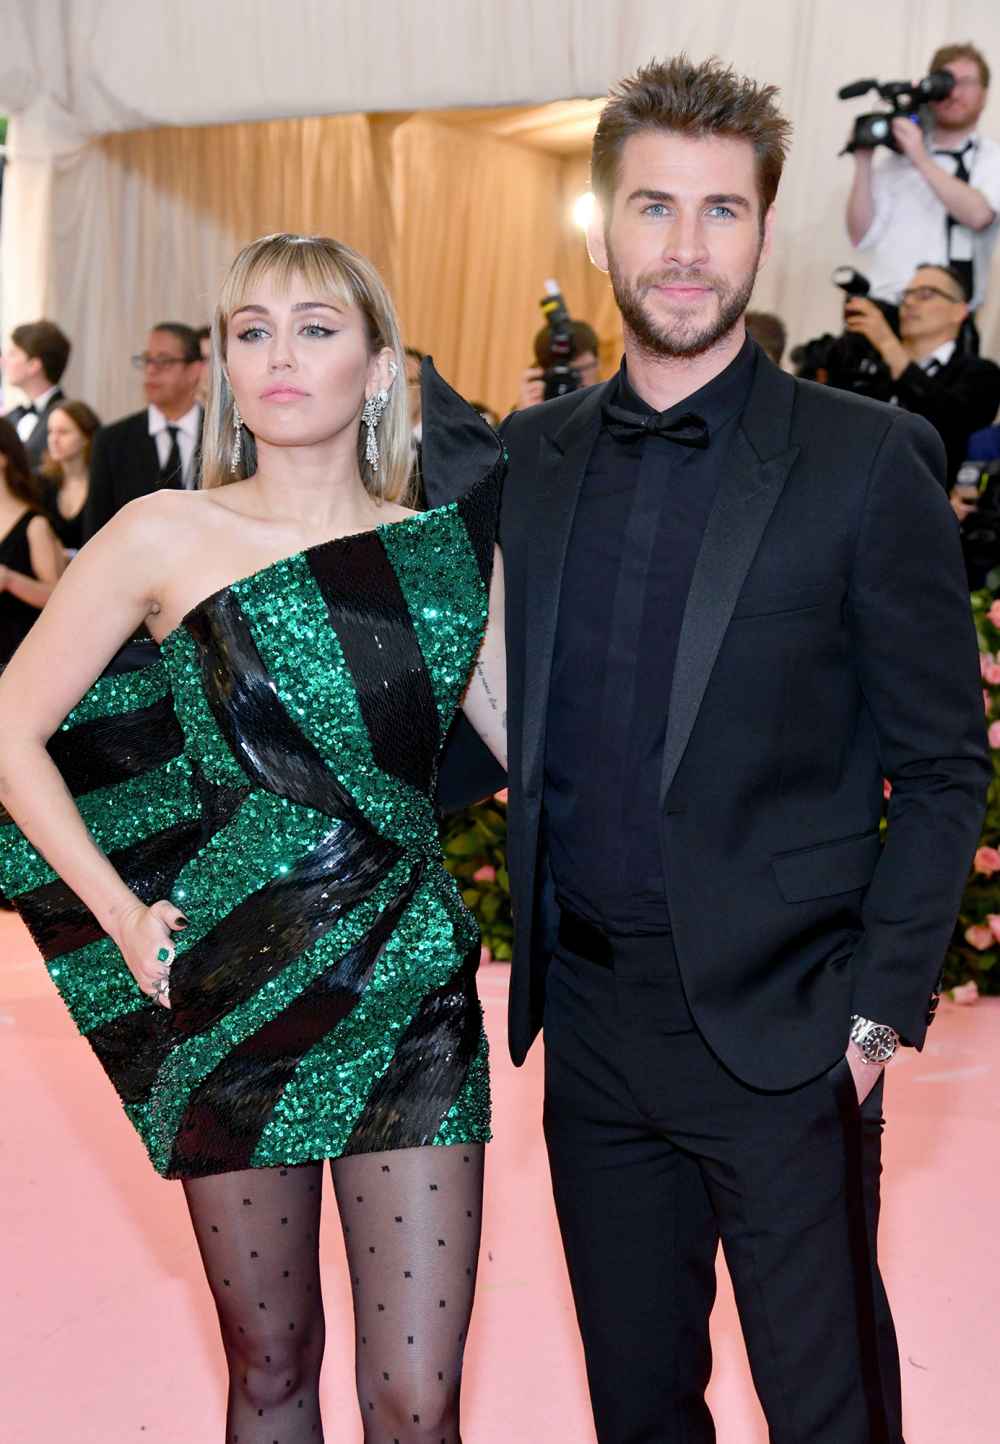 Miley Cyrus, Liam Hemsworth’s Families Want Them to Work Things Out